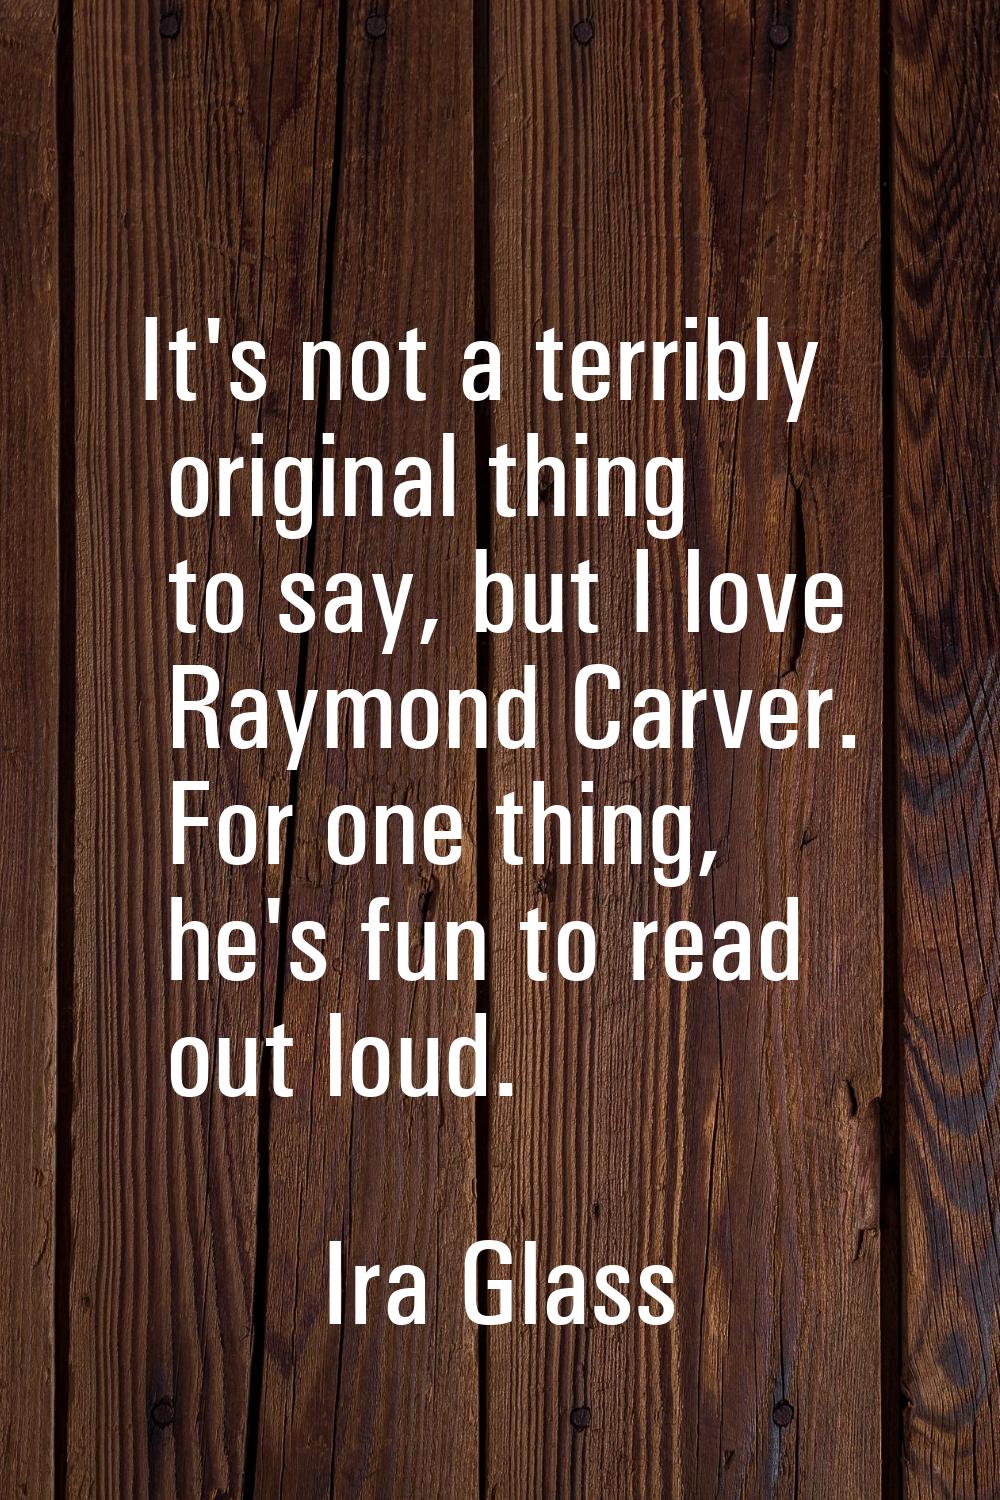 It's not a terribly original thing to say, but I love Raymond Carver. For one thing, he's fun to re